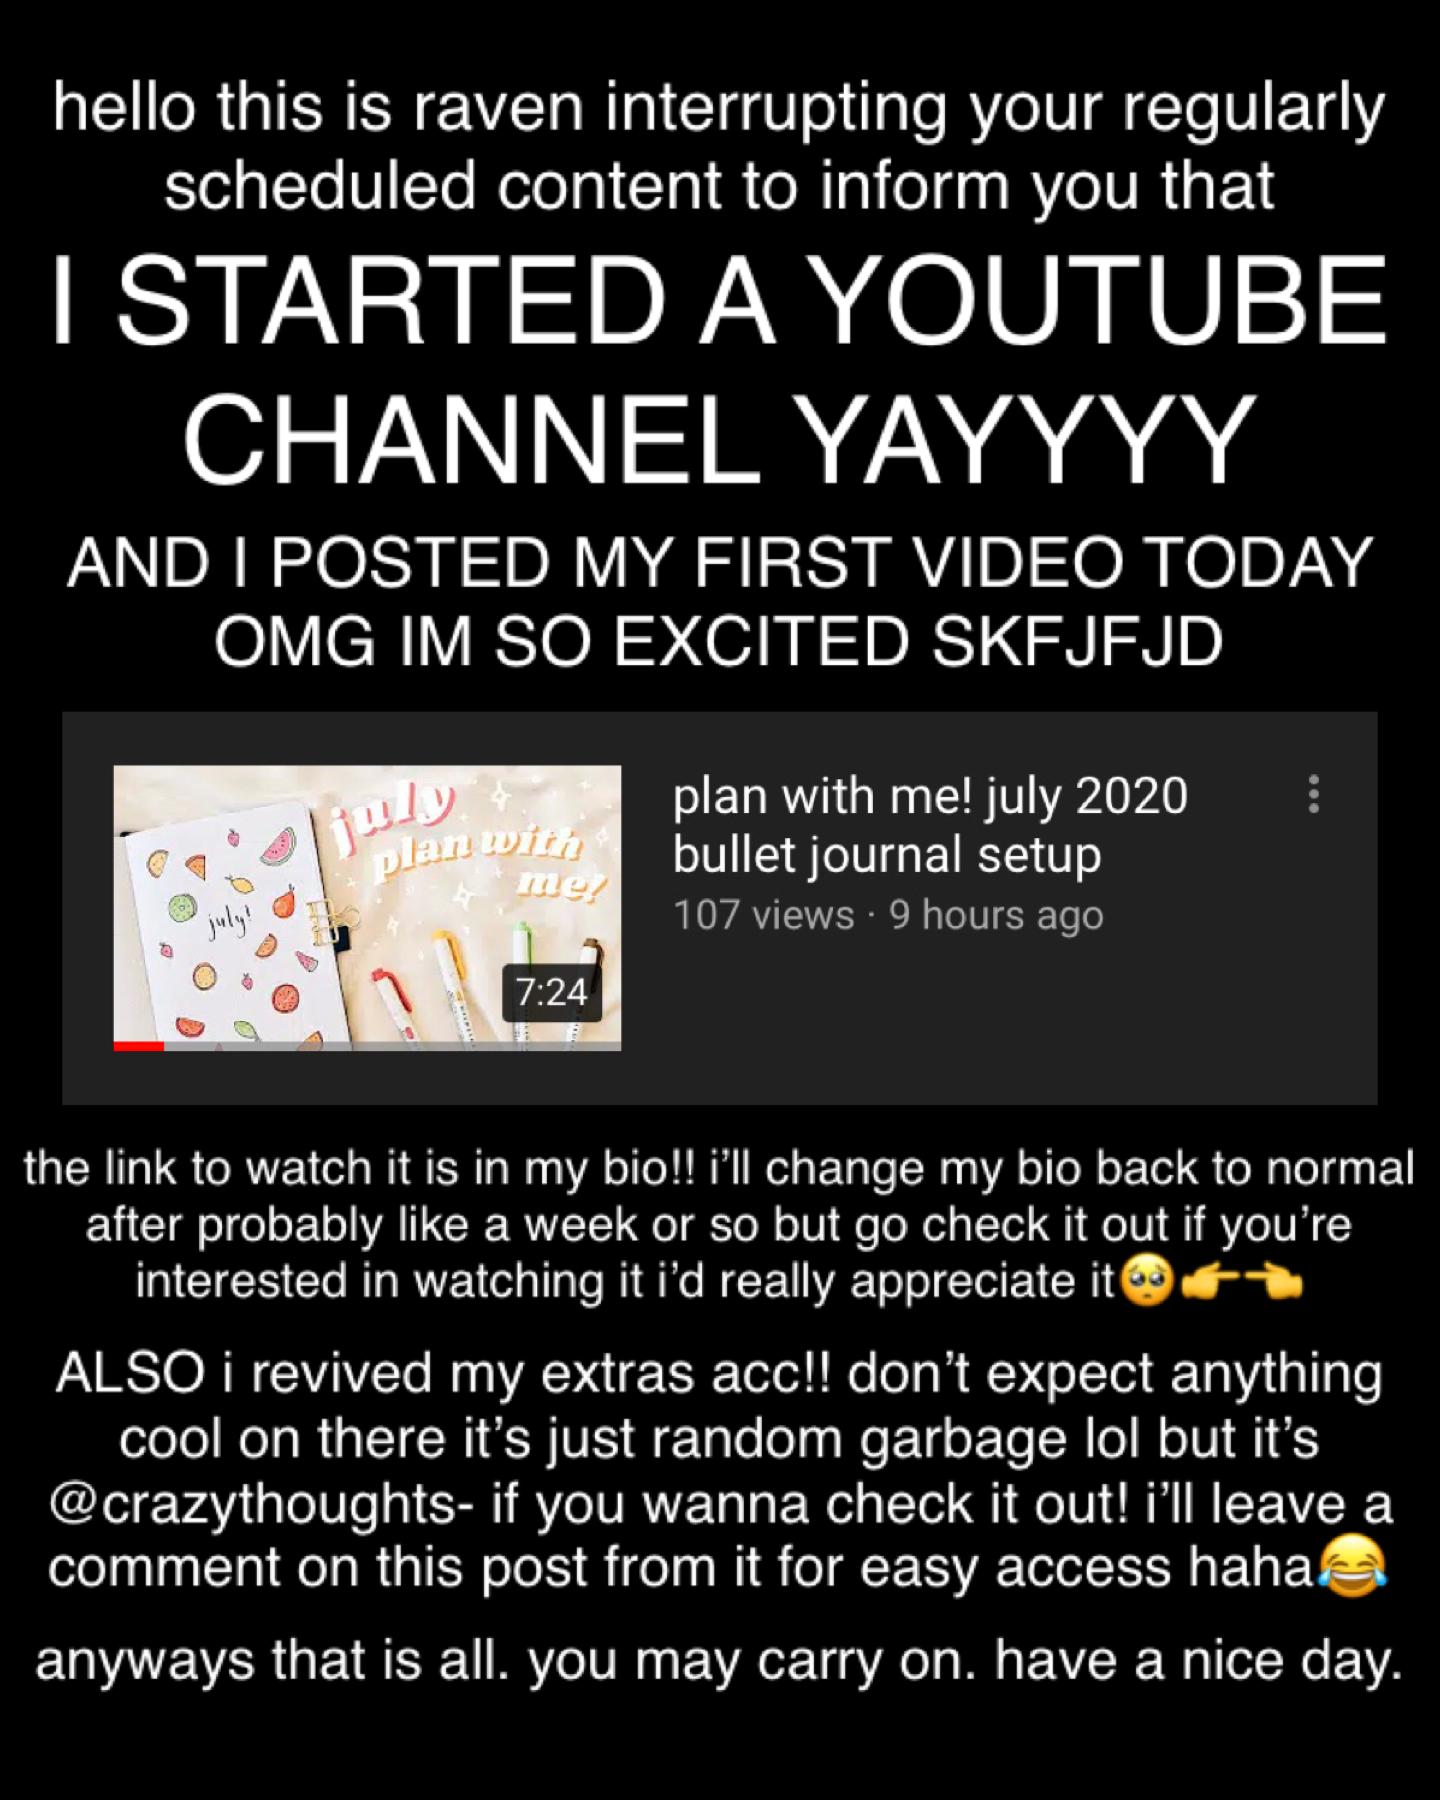 i finally started a youtube channel!! and people are actually watching the video!! wHaT tHe fWuH-
my revived extras is @crazythoughts- ! it’ll prob die soon again tho pFFFF sorry for the self promo post i’m just v excited🥺